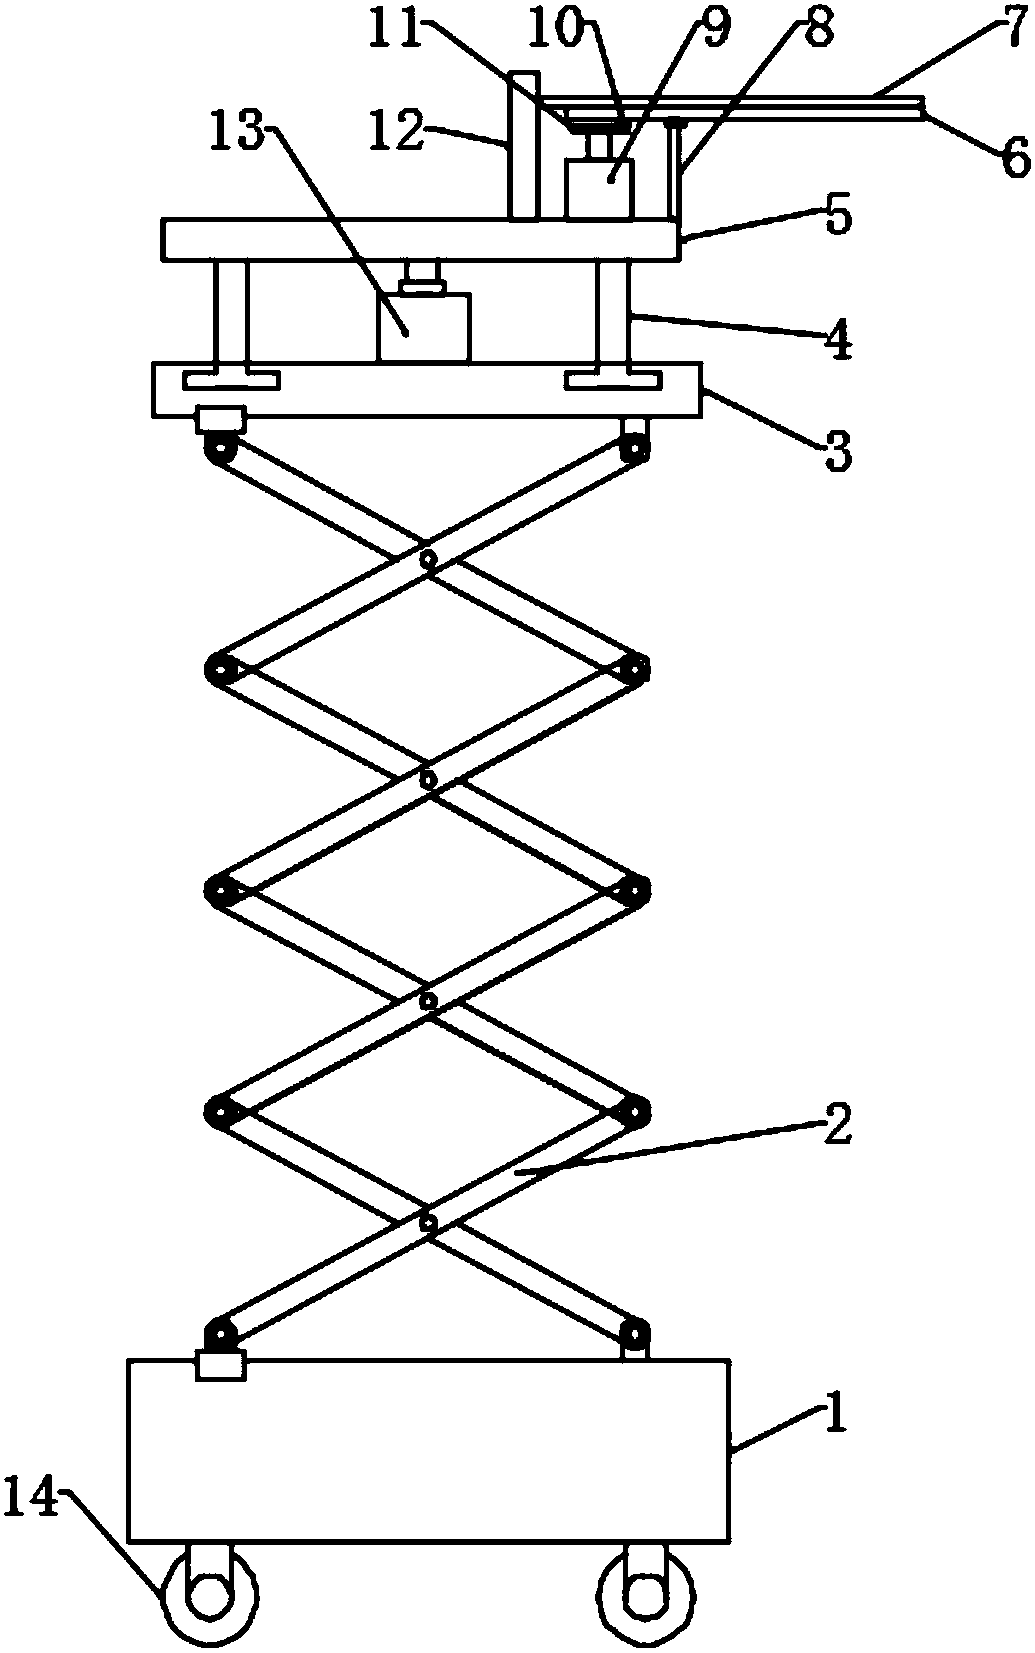 Double-blade trimming device for garden